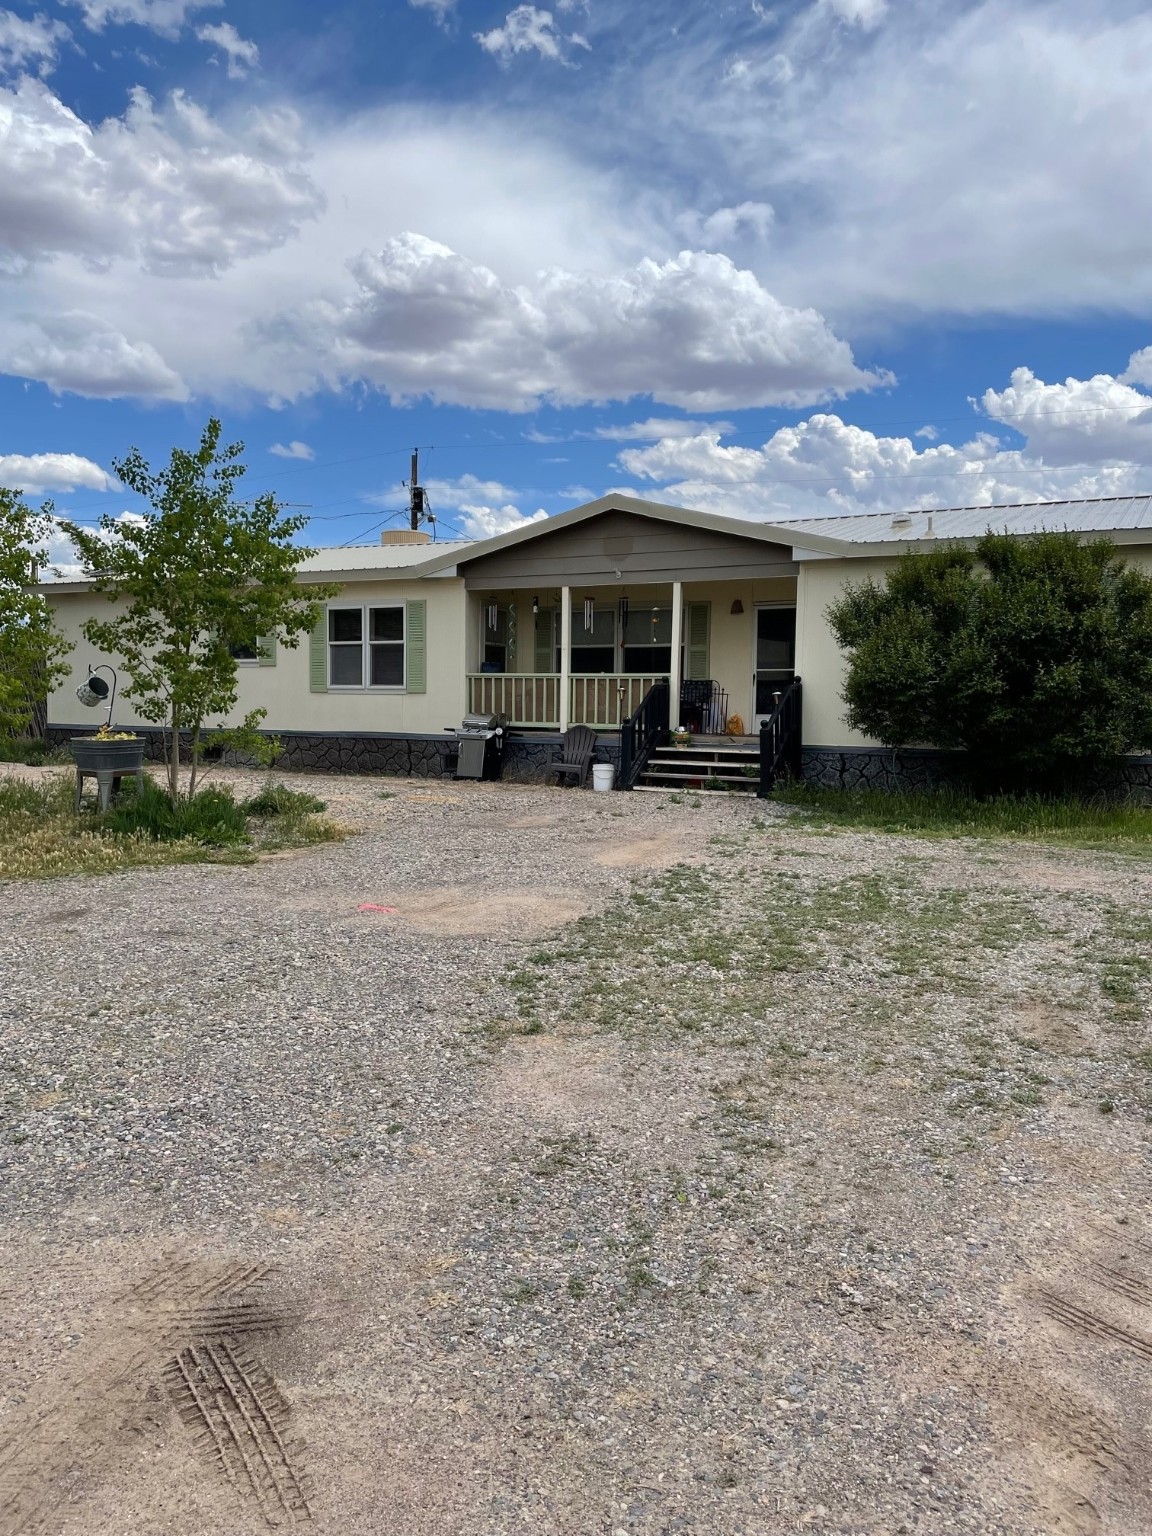 2109 N McCurdy Road B, Espanola, New Mexico 87532, 3 Bedrooms Bedrooms, ,2 BathroomsBathrooms,Residential,For Sale,2109 N McCurdy Road B,202338219